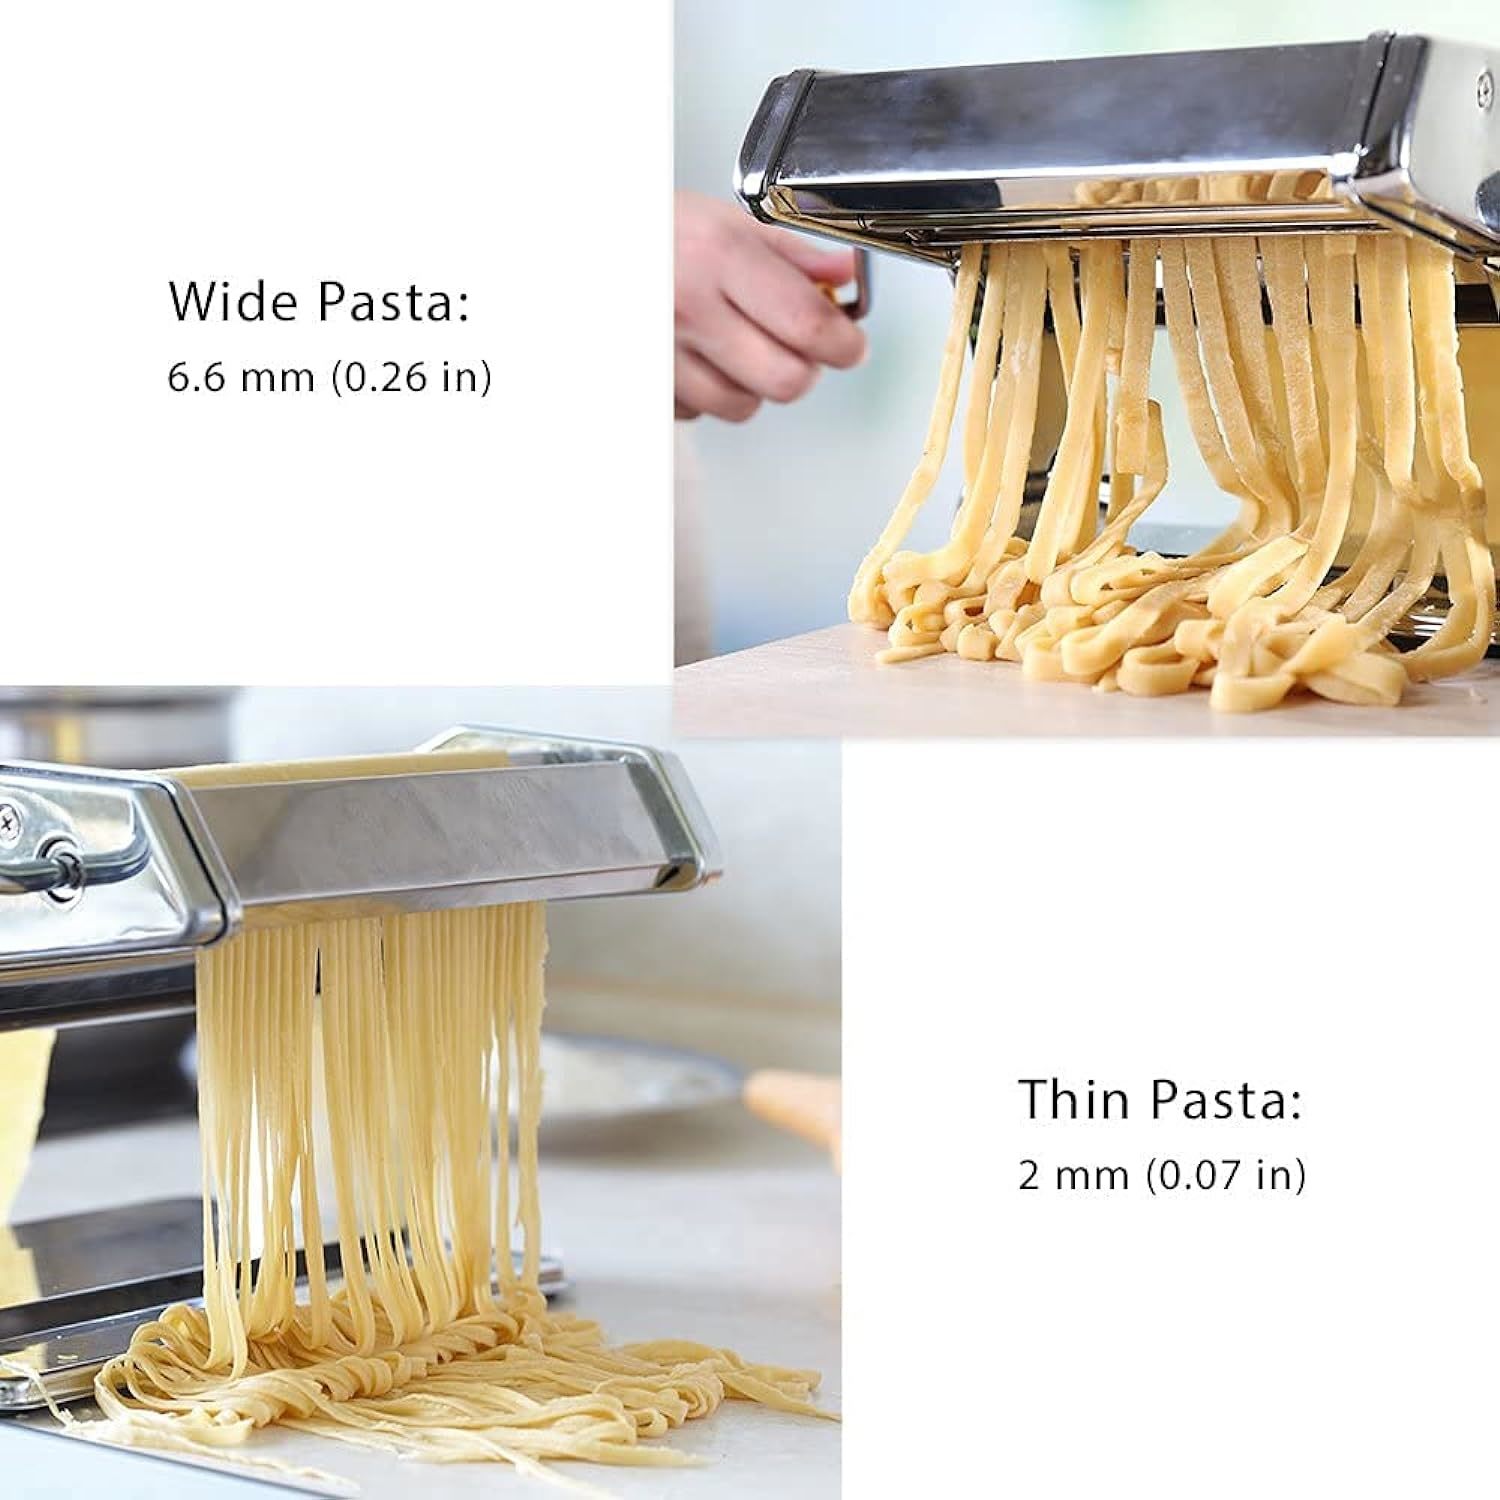 1pc Stainless Steel Manual Noodle Cutter, Rolling Pin Style Pasta